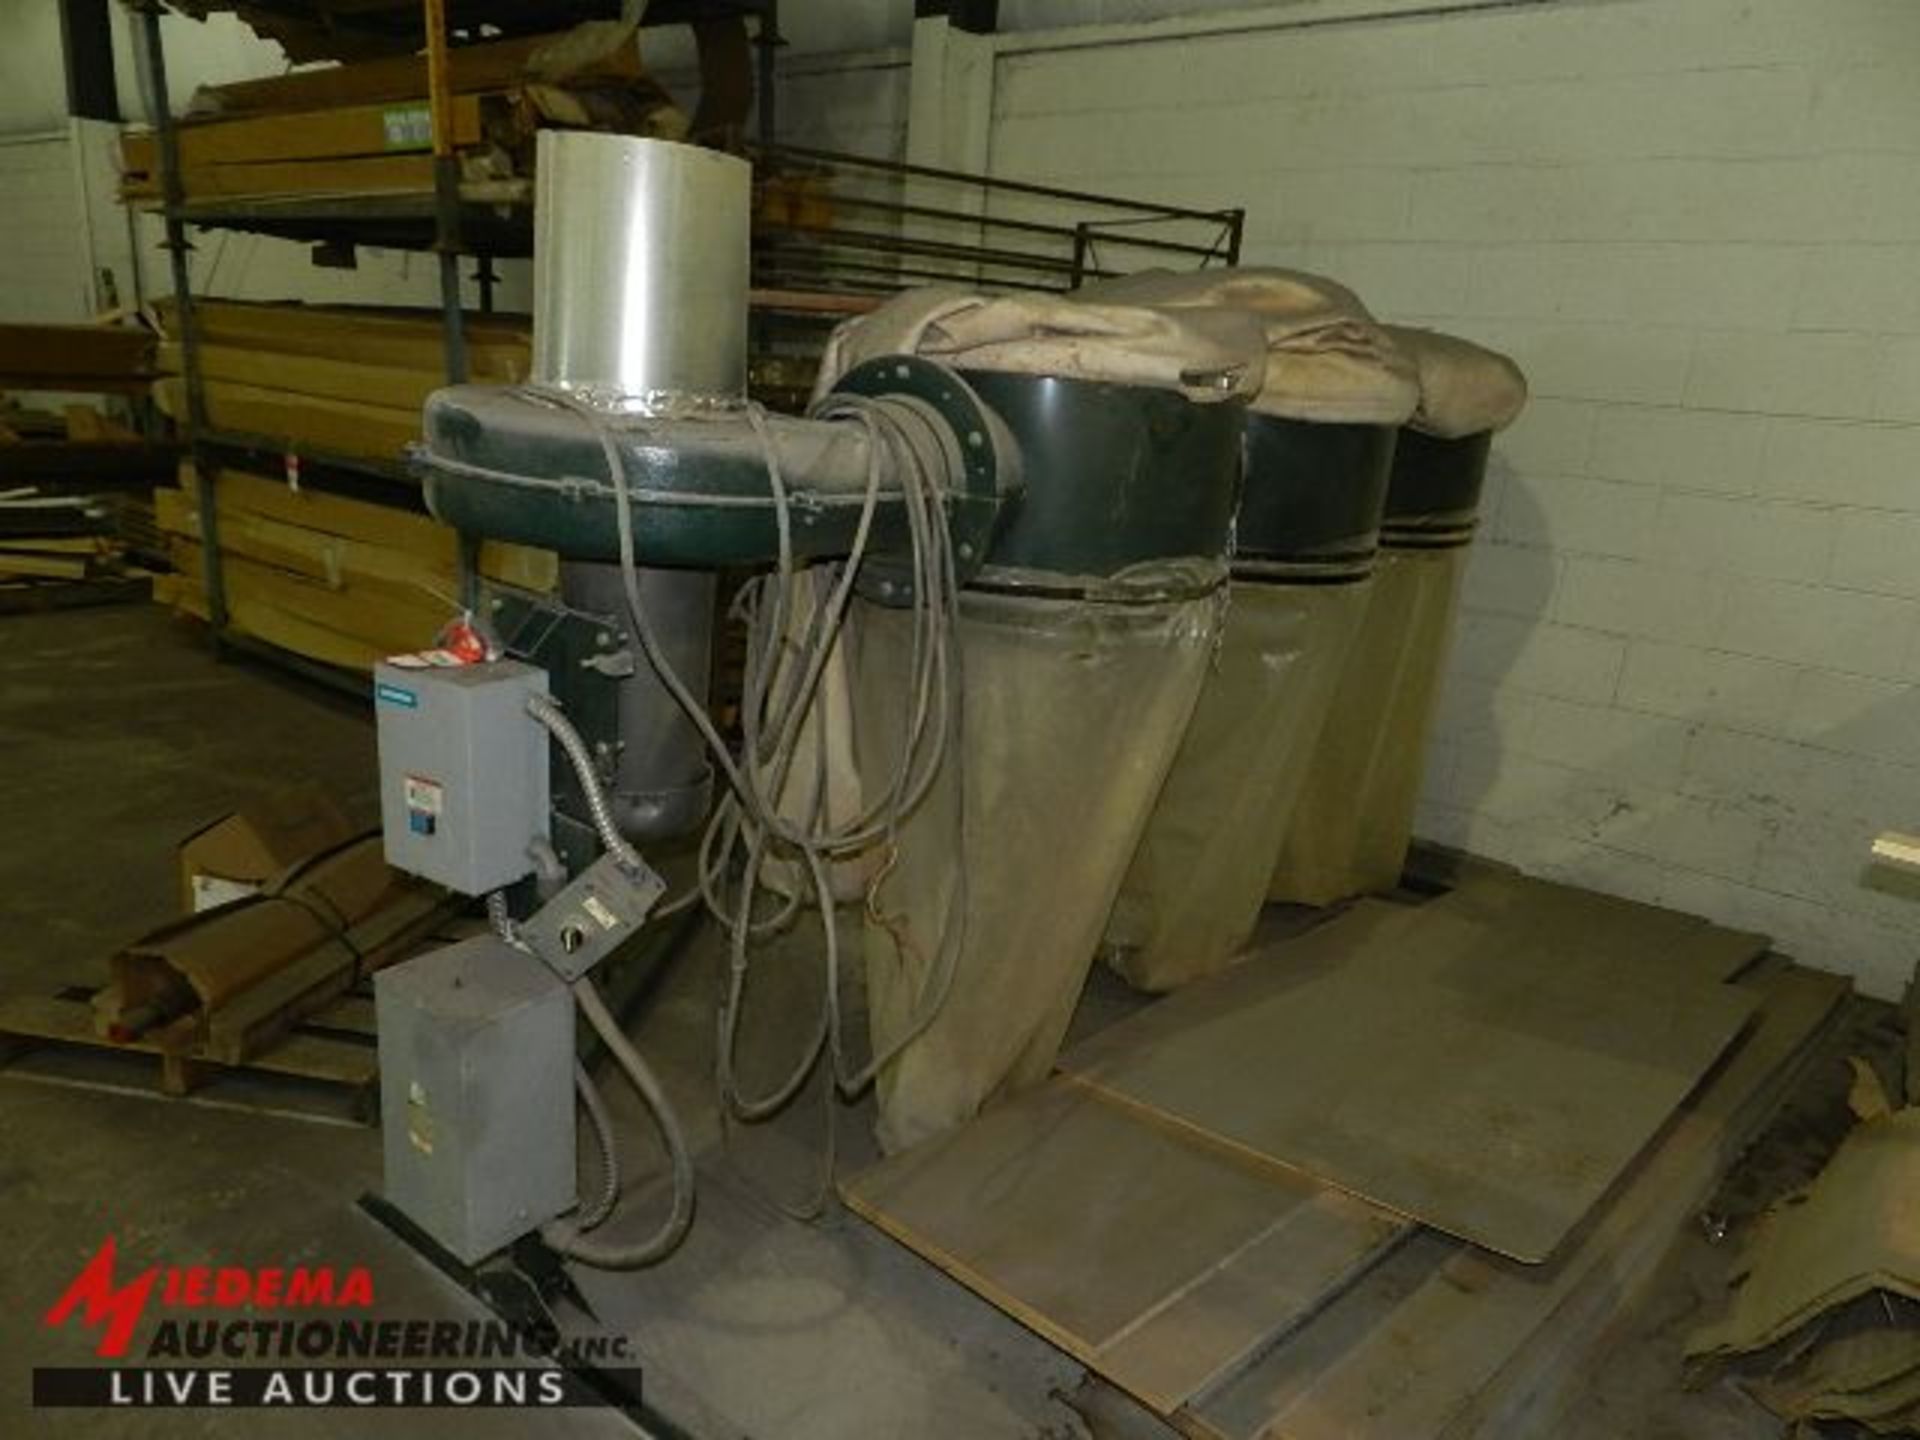 GRIZZLY 3 BAG DUST COLLECTOR WITH VALDOR 7 1/2 HP 23460 VOLT 3 PHASE ELECTRIC MOTOR - Image 2 of 3